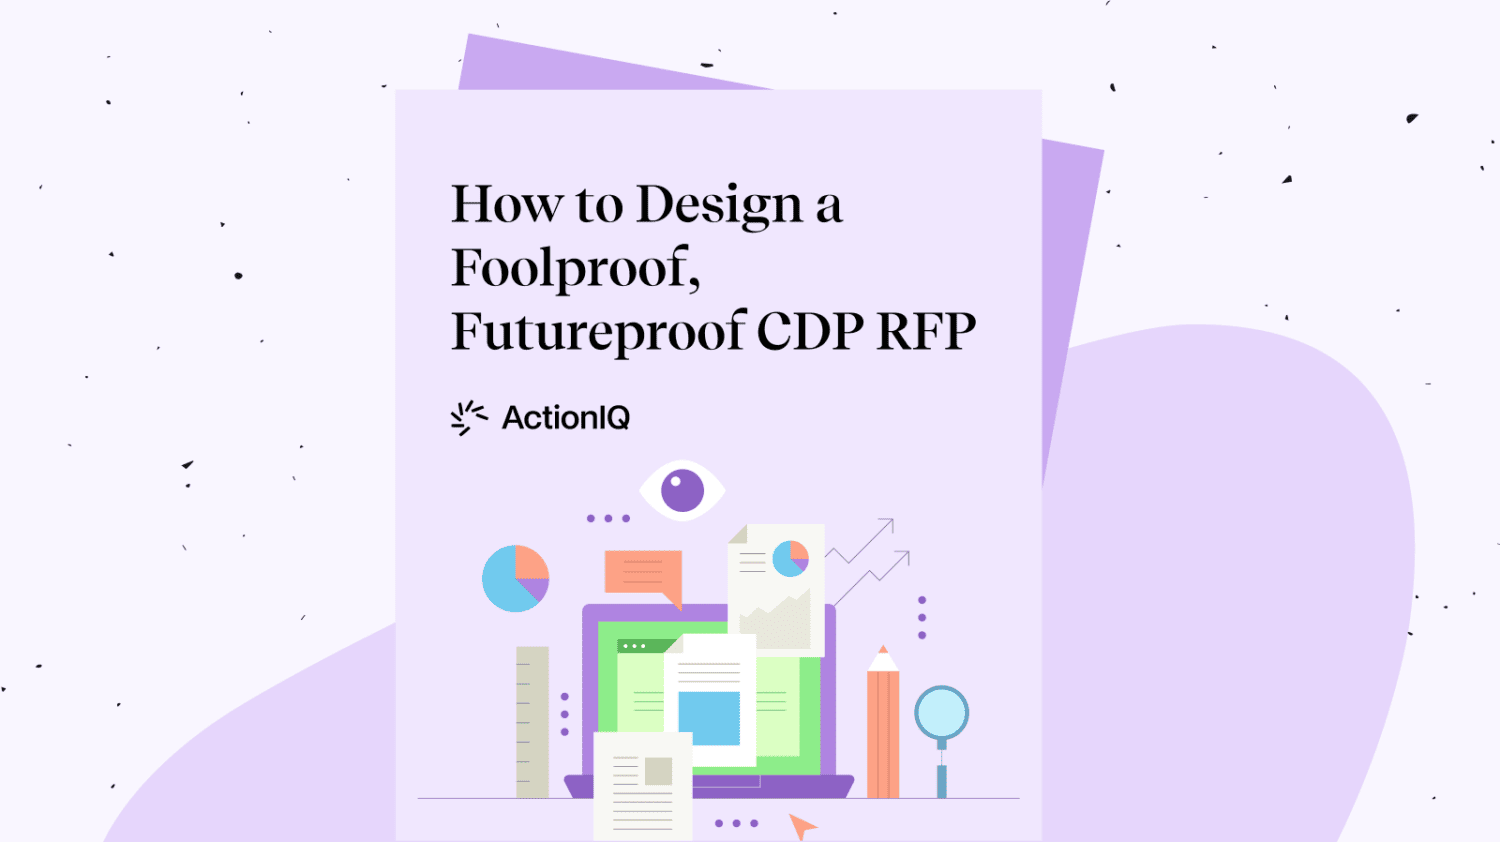 CDP RFP Template and Guide - How to Design a Foolproof, Futureproof CDP RFP